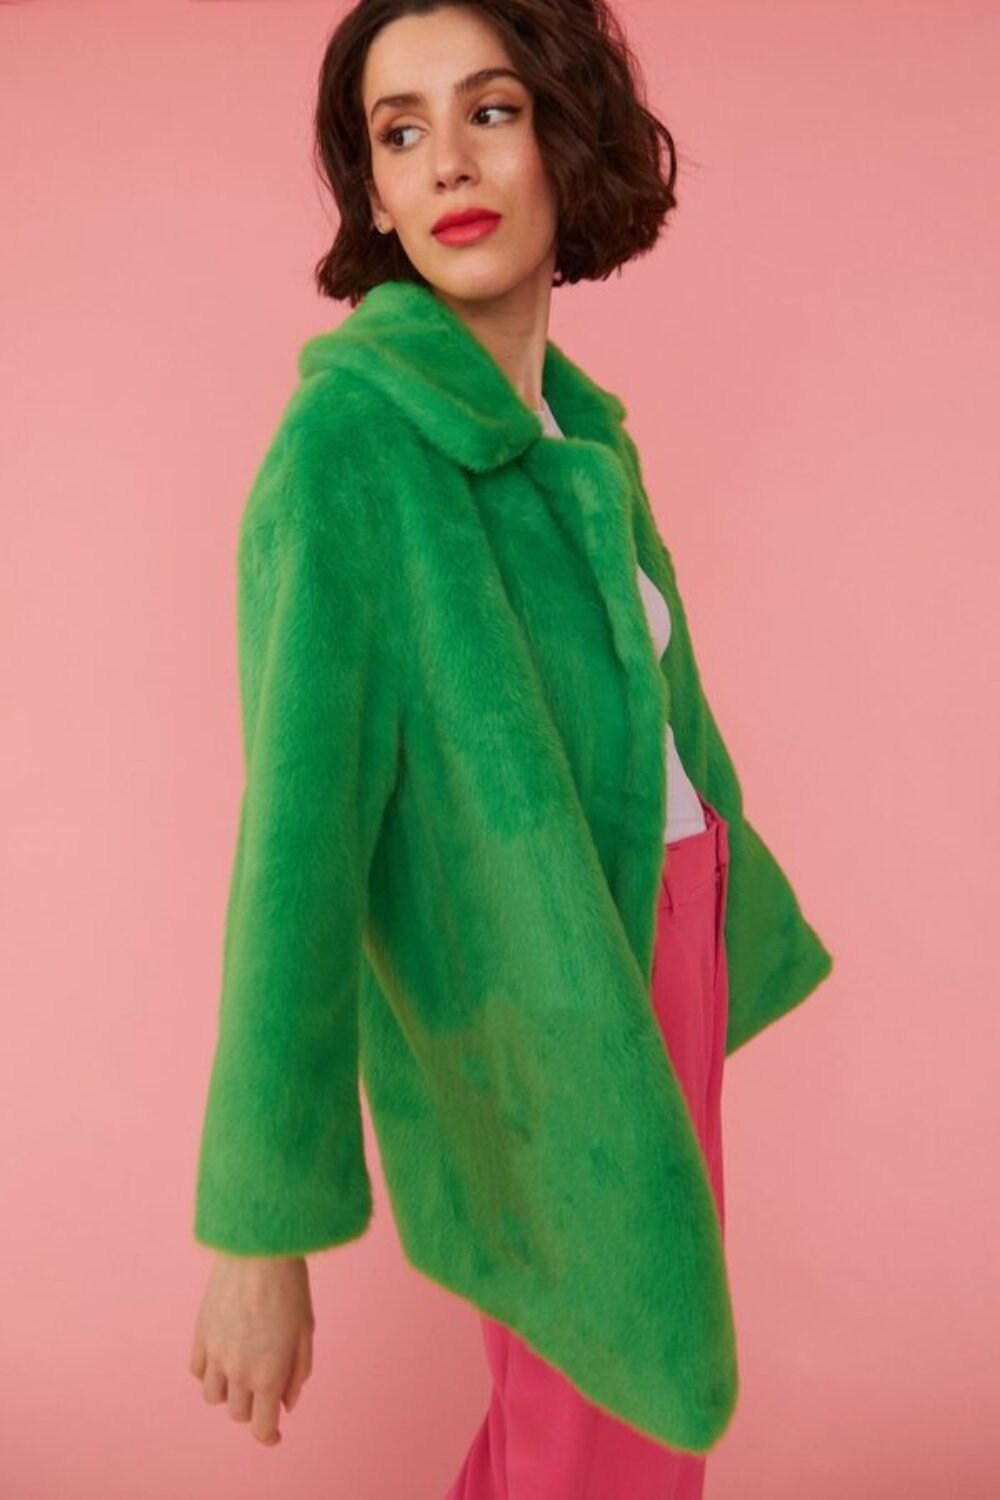 Shop Lux Green Faux Fur Duchess Midi Coat and women's luxury and designer clothes at www.lux-apparel.co.uk